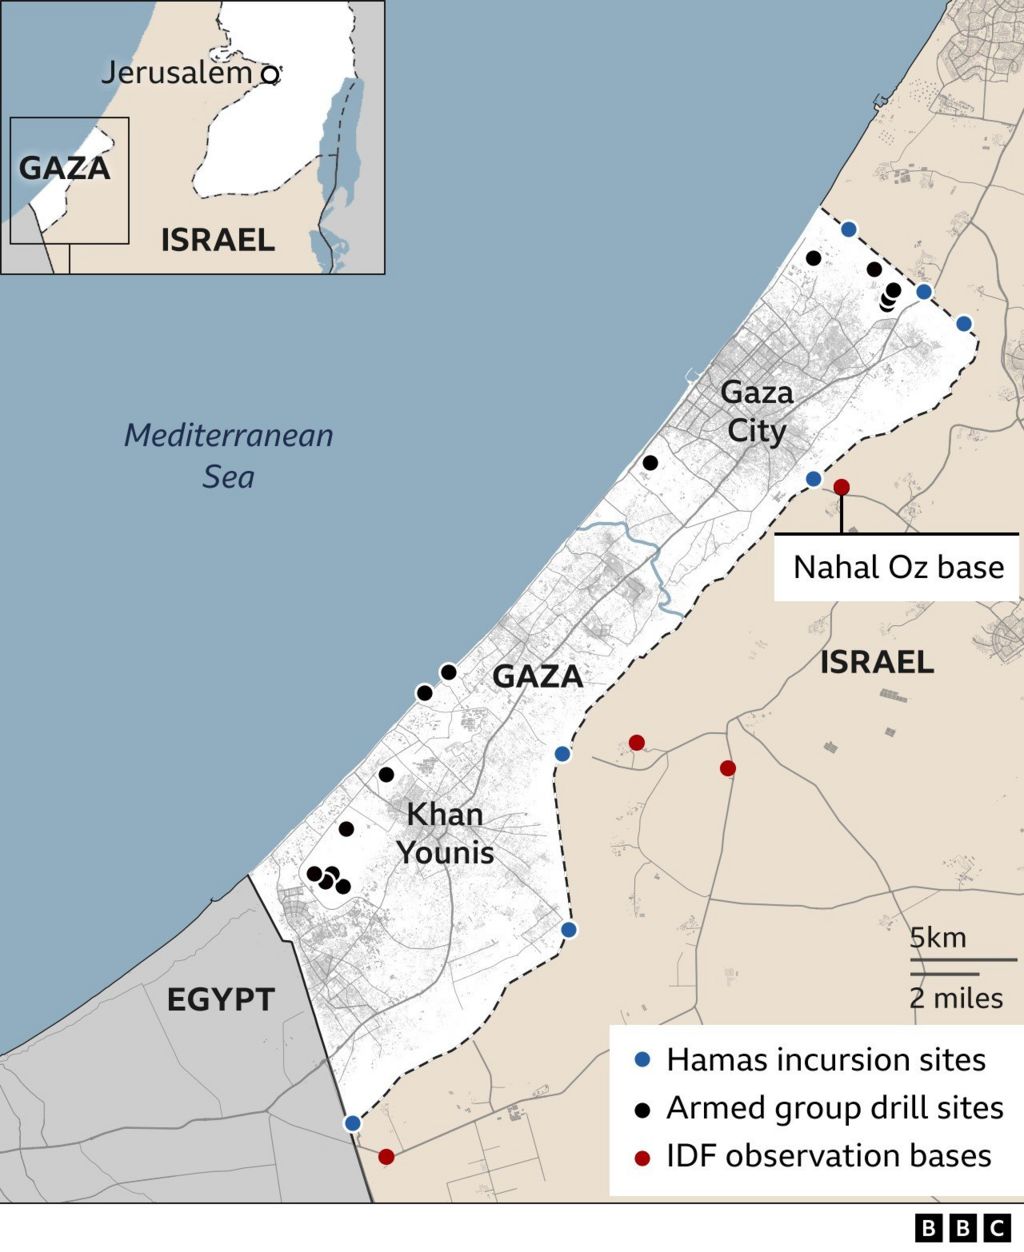 Map of Gaza with partial view of Israel, showing border fence, IDF observation bases, armed group drill sites and sites of Hamas incursion